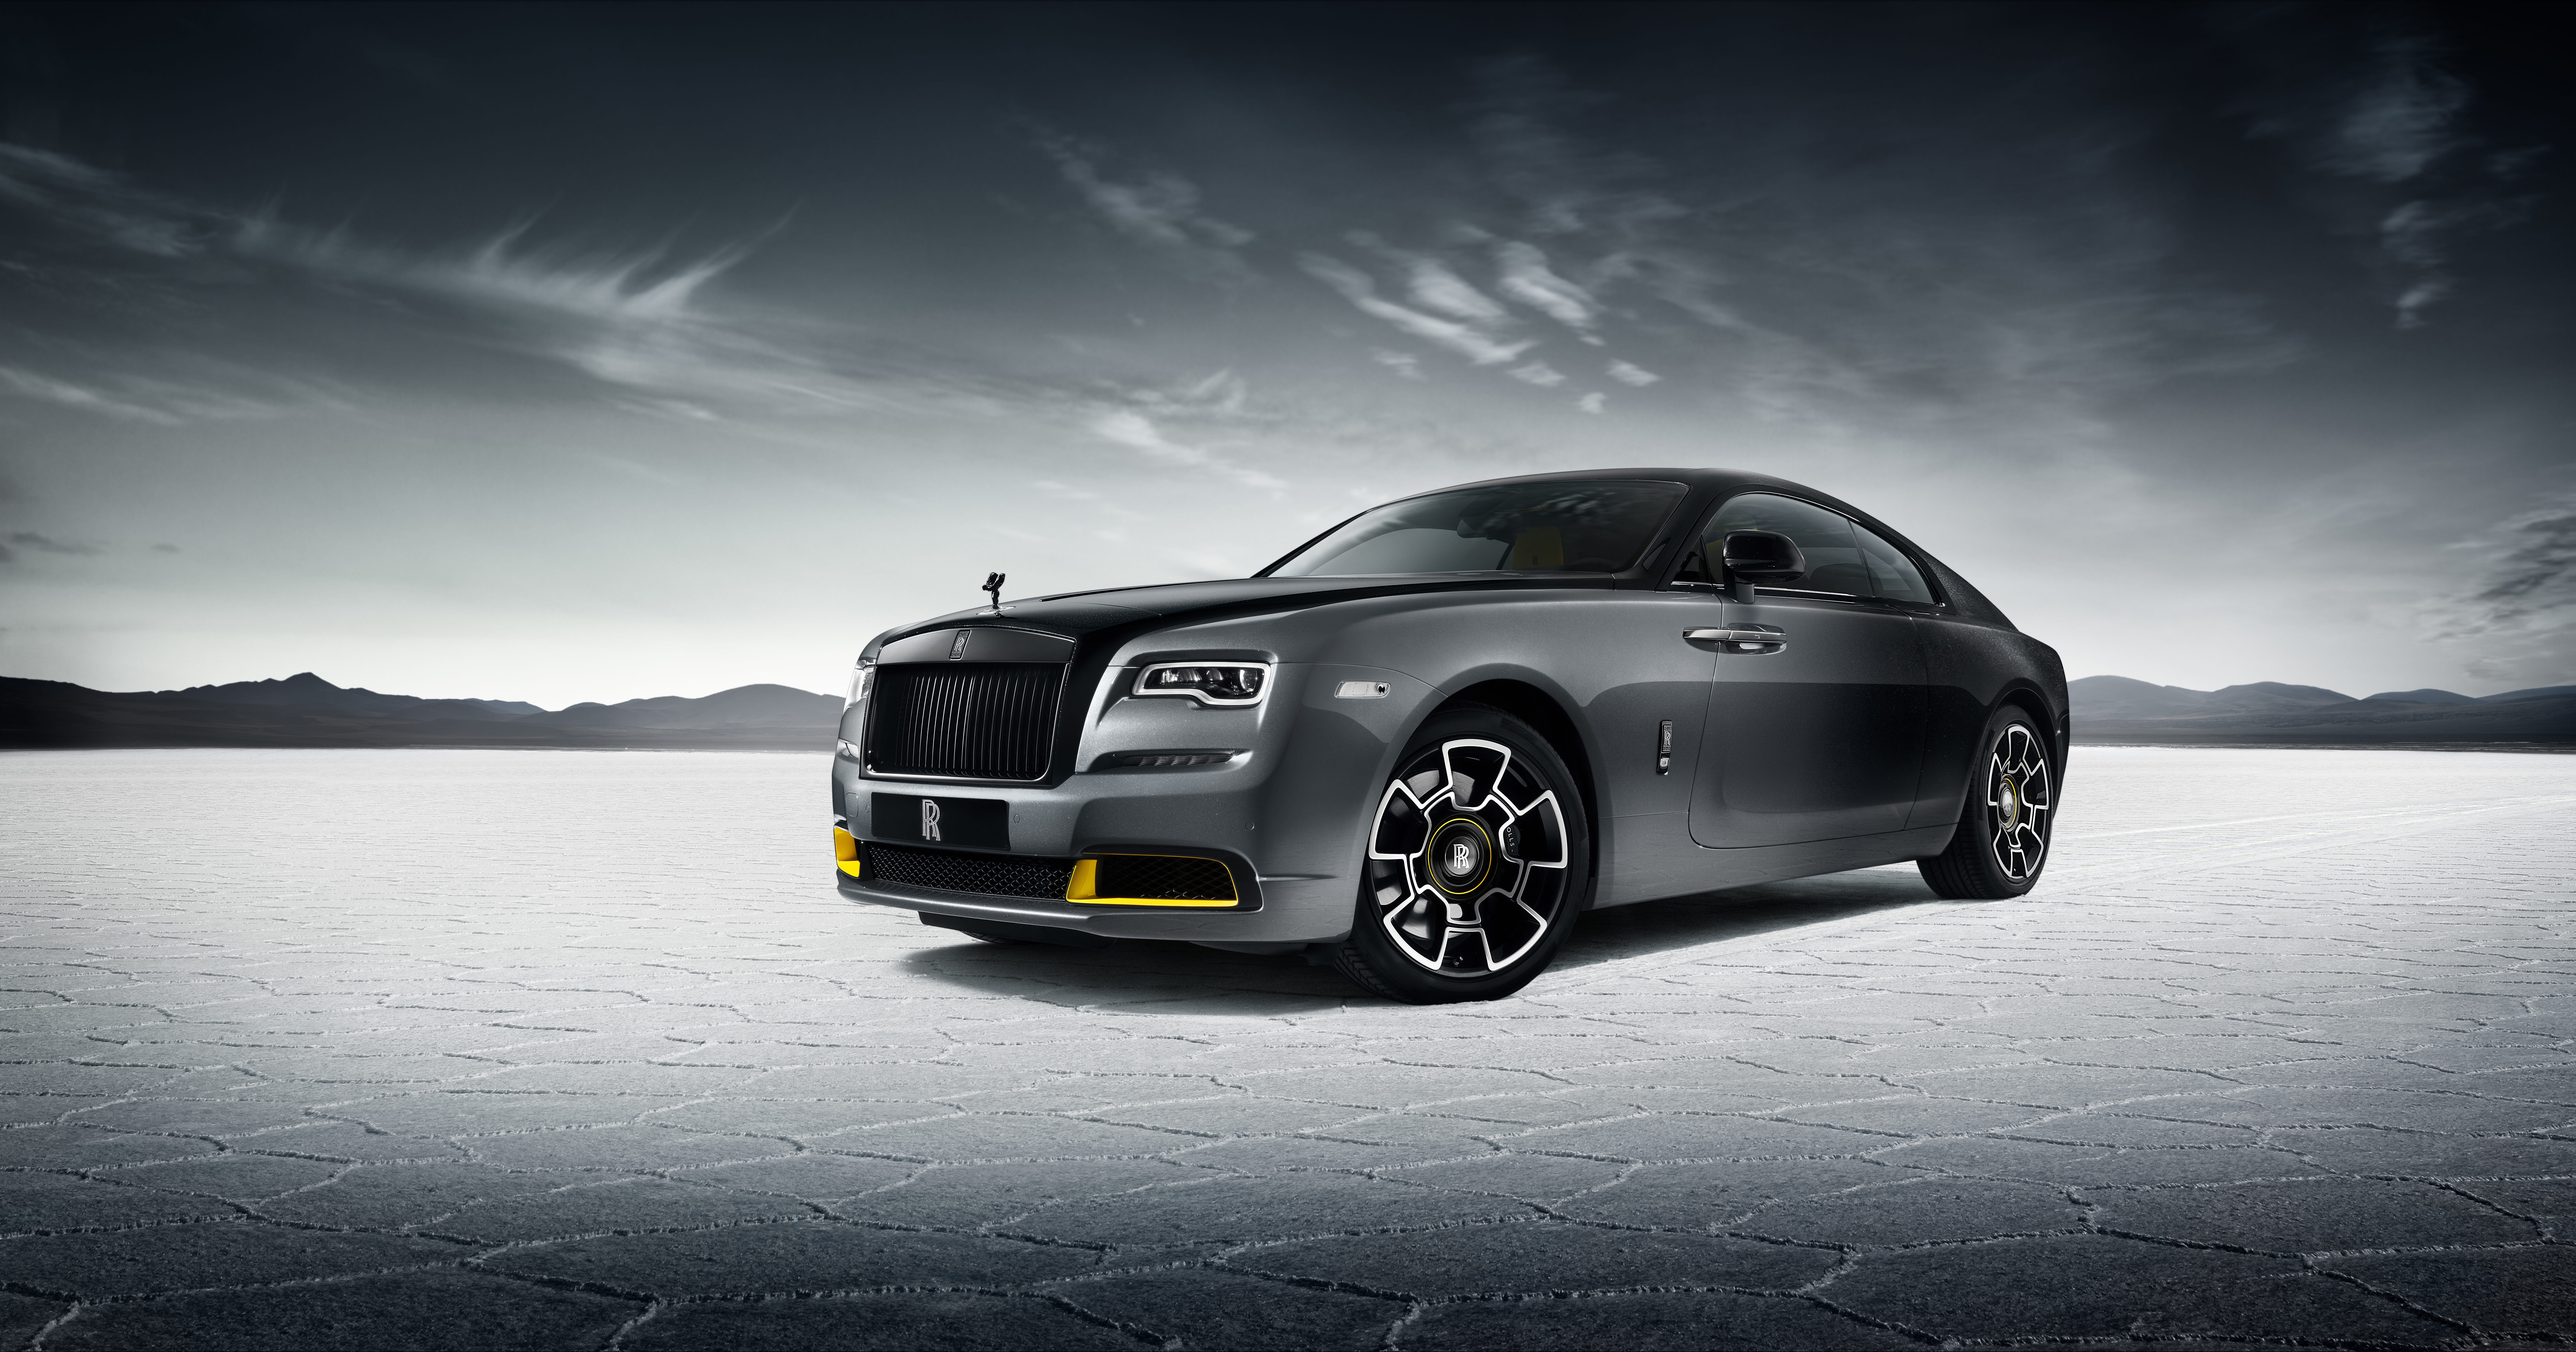 Rolls-Royce unveiled its latest V12 coupe